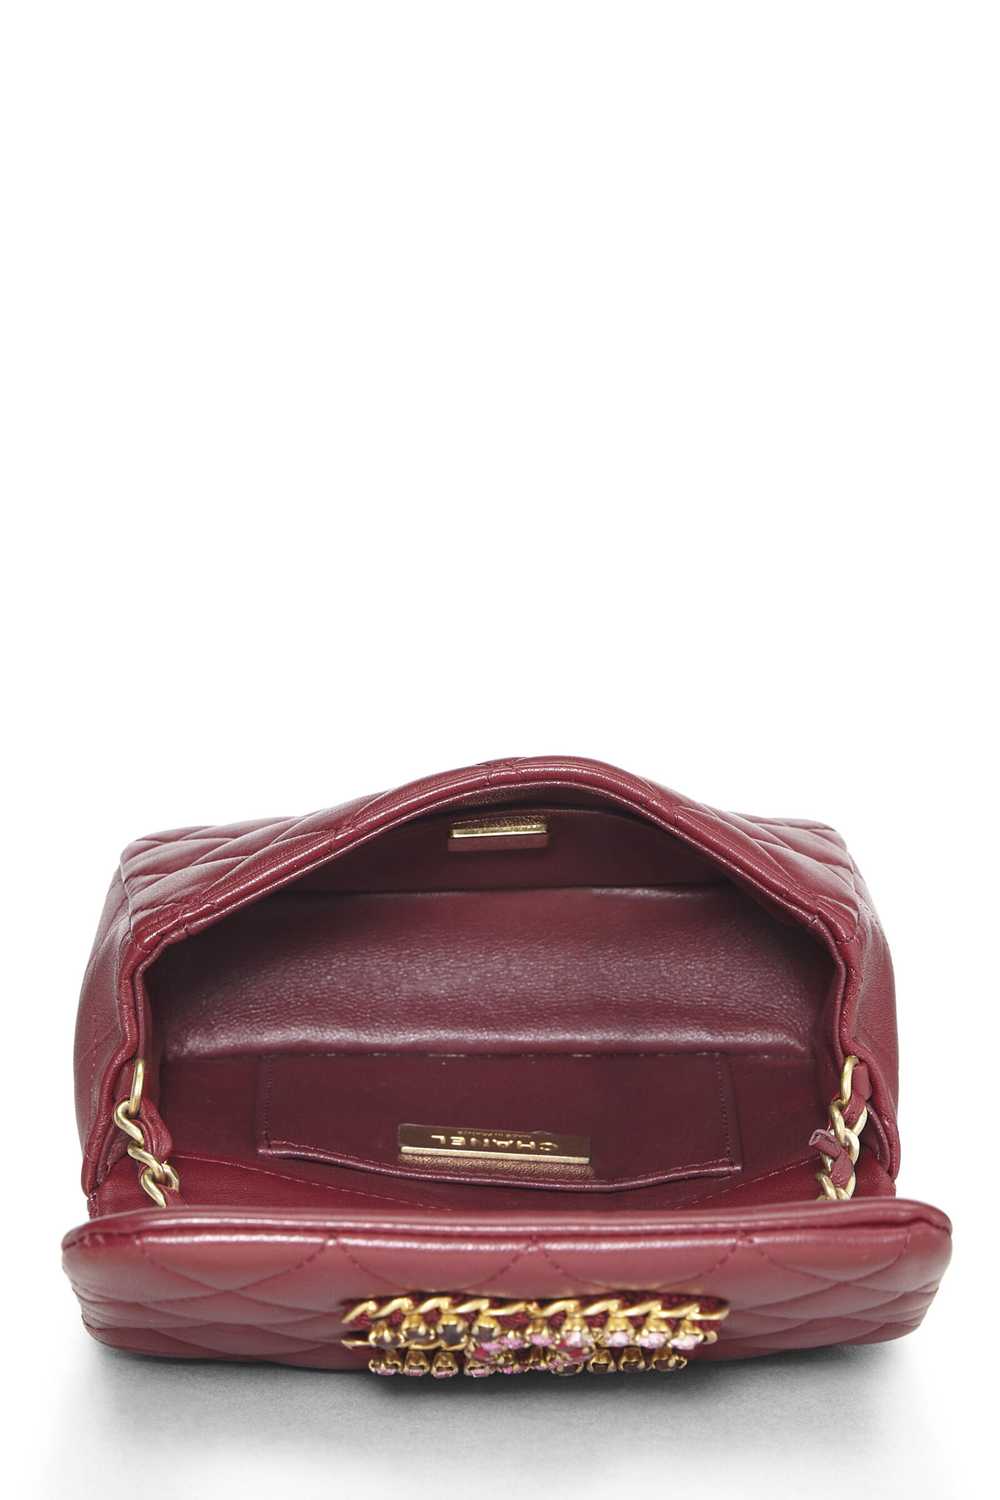 Burgundy Quilted Lambskin Crystal Flap Bag Mini - image 6